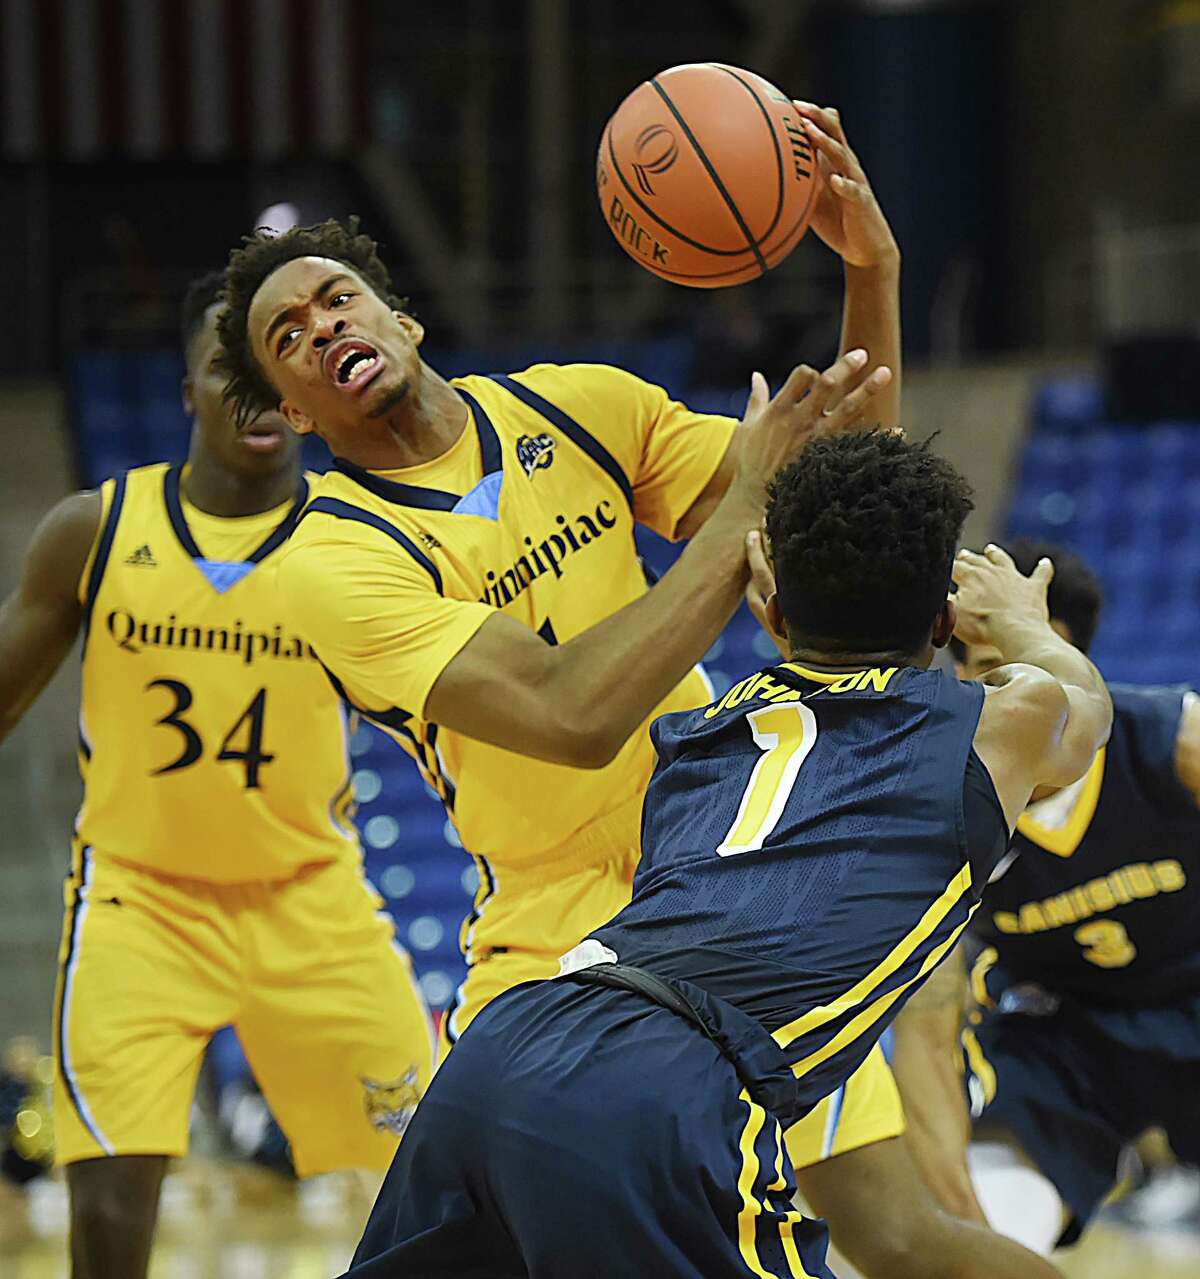 Quinnipiac senior guard Cameron Young is fouled by Canisius sophomore guard Malik Johnson for a loose ball, Friday, Jan. 5, 2018, at the TD Bank Sports Center in Hamden. Canisius won, 82-74.